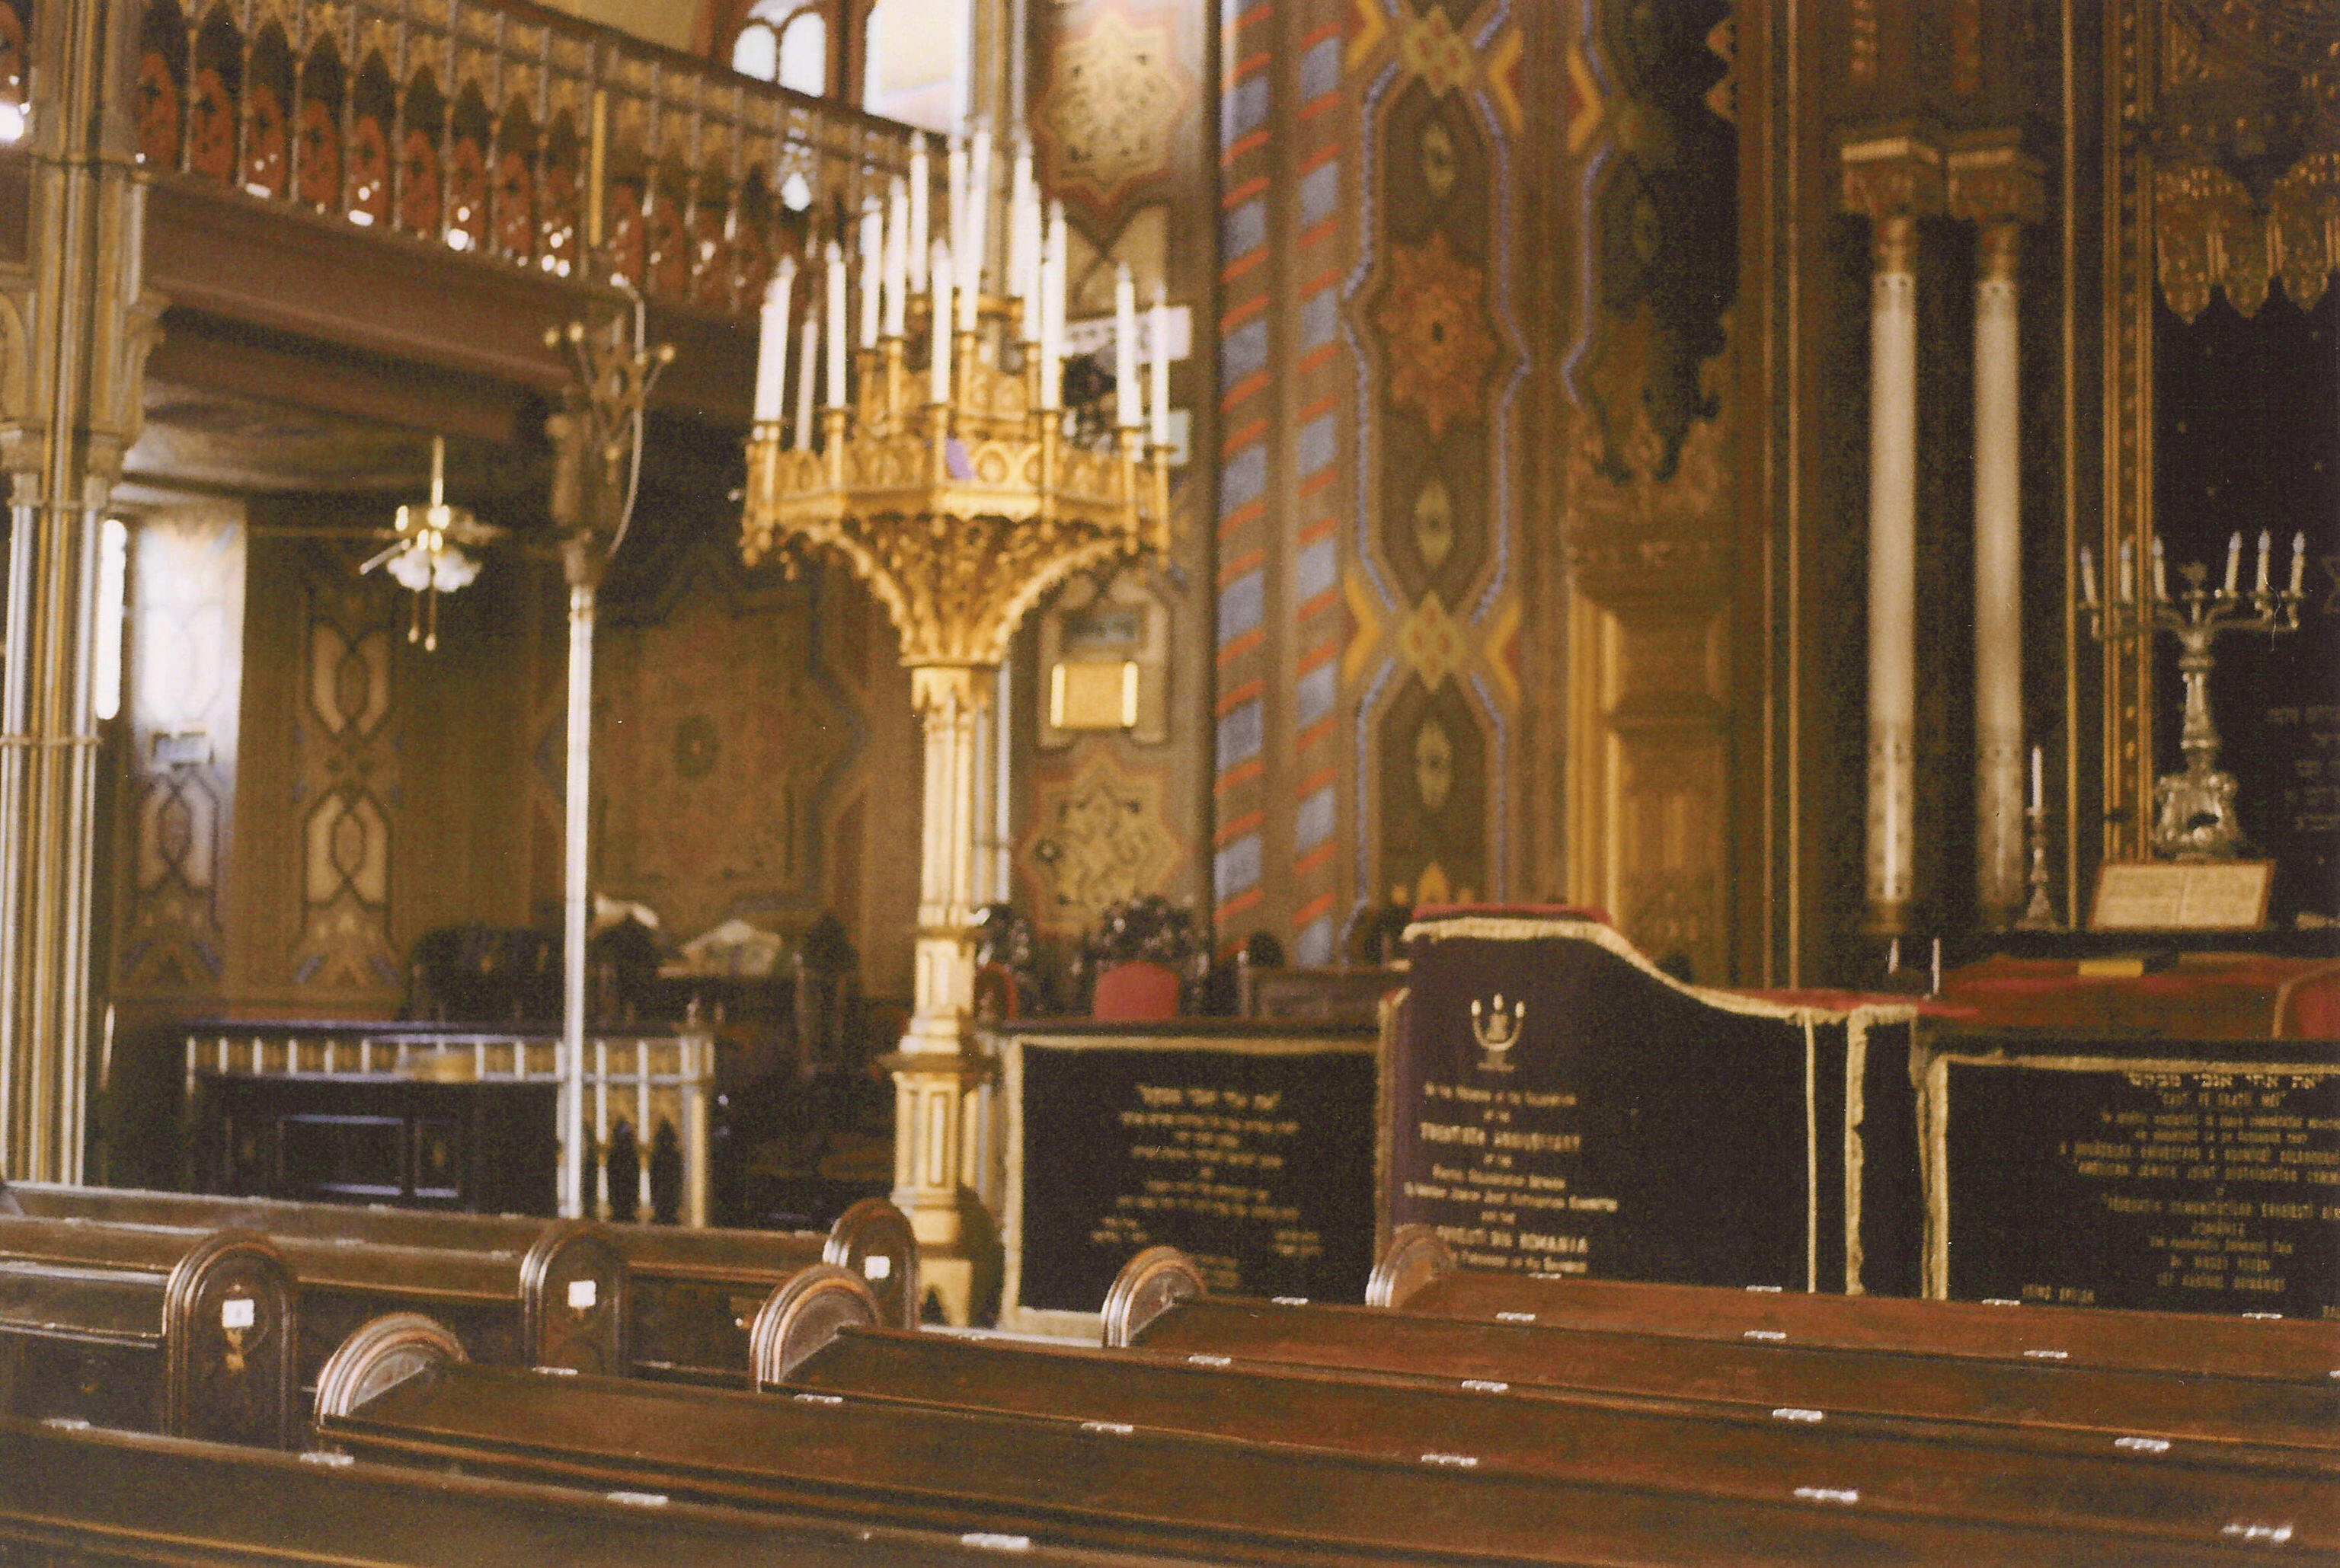 Interior of the Choral Temple, the main synagogue of Bucharest, Romania. With the declining Jewish population in that city, this main hall is seldom used; most services are held in a smaller room.